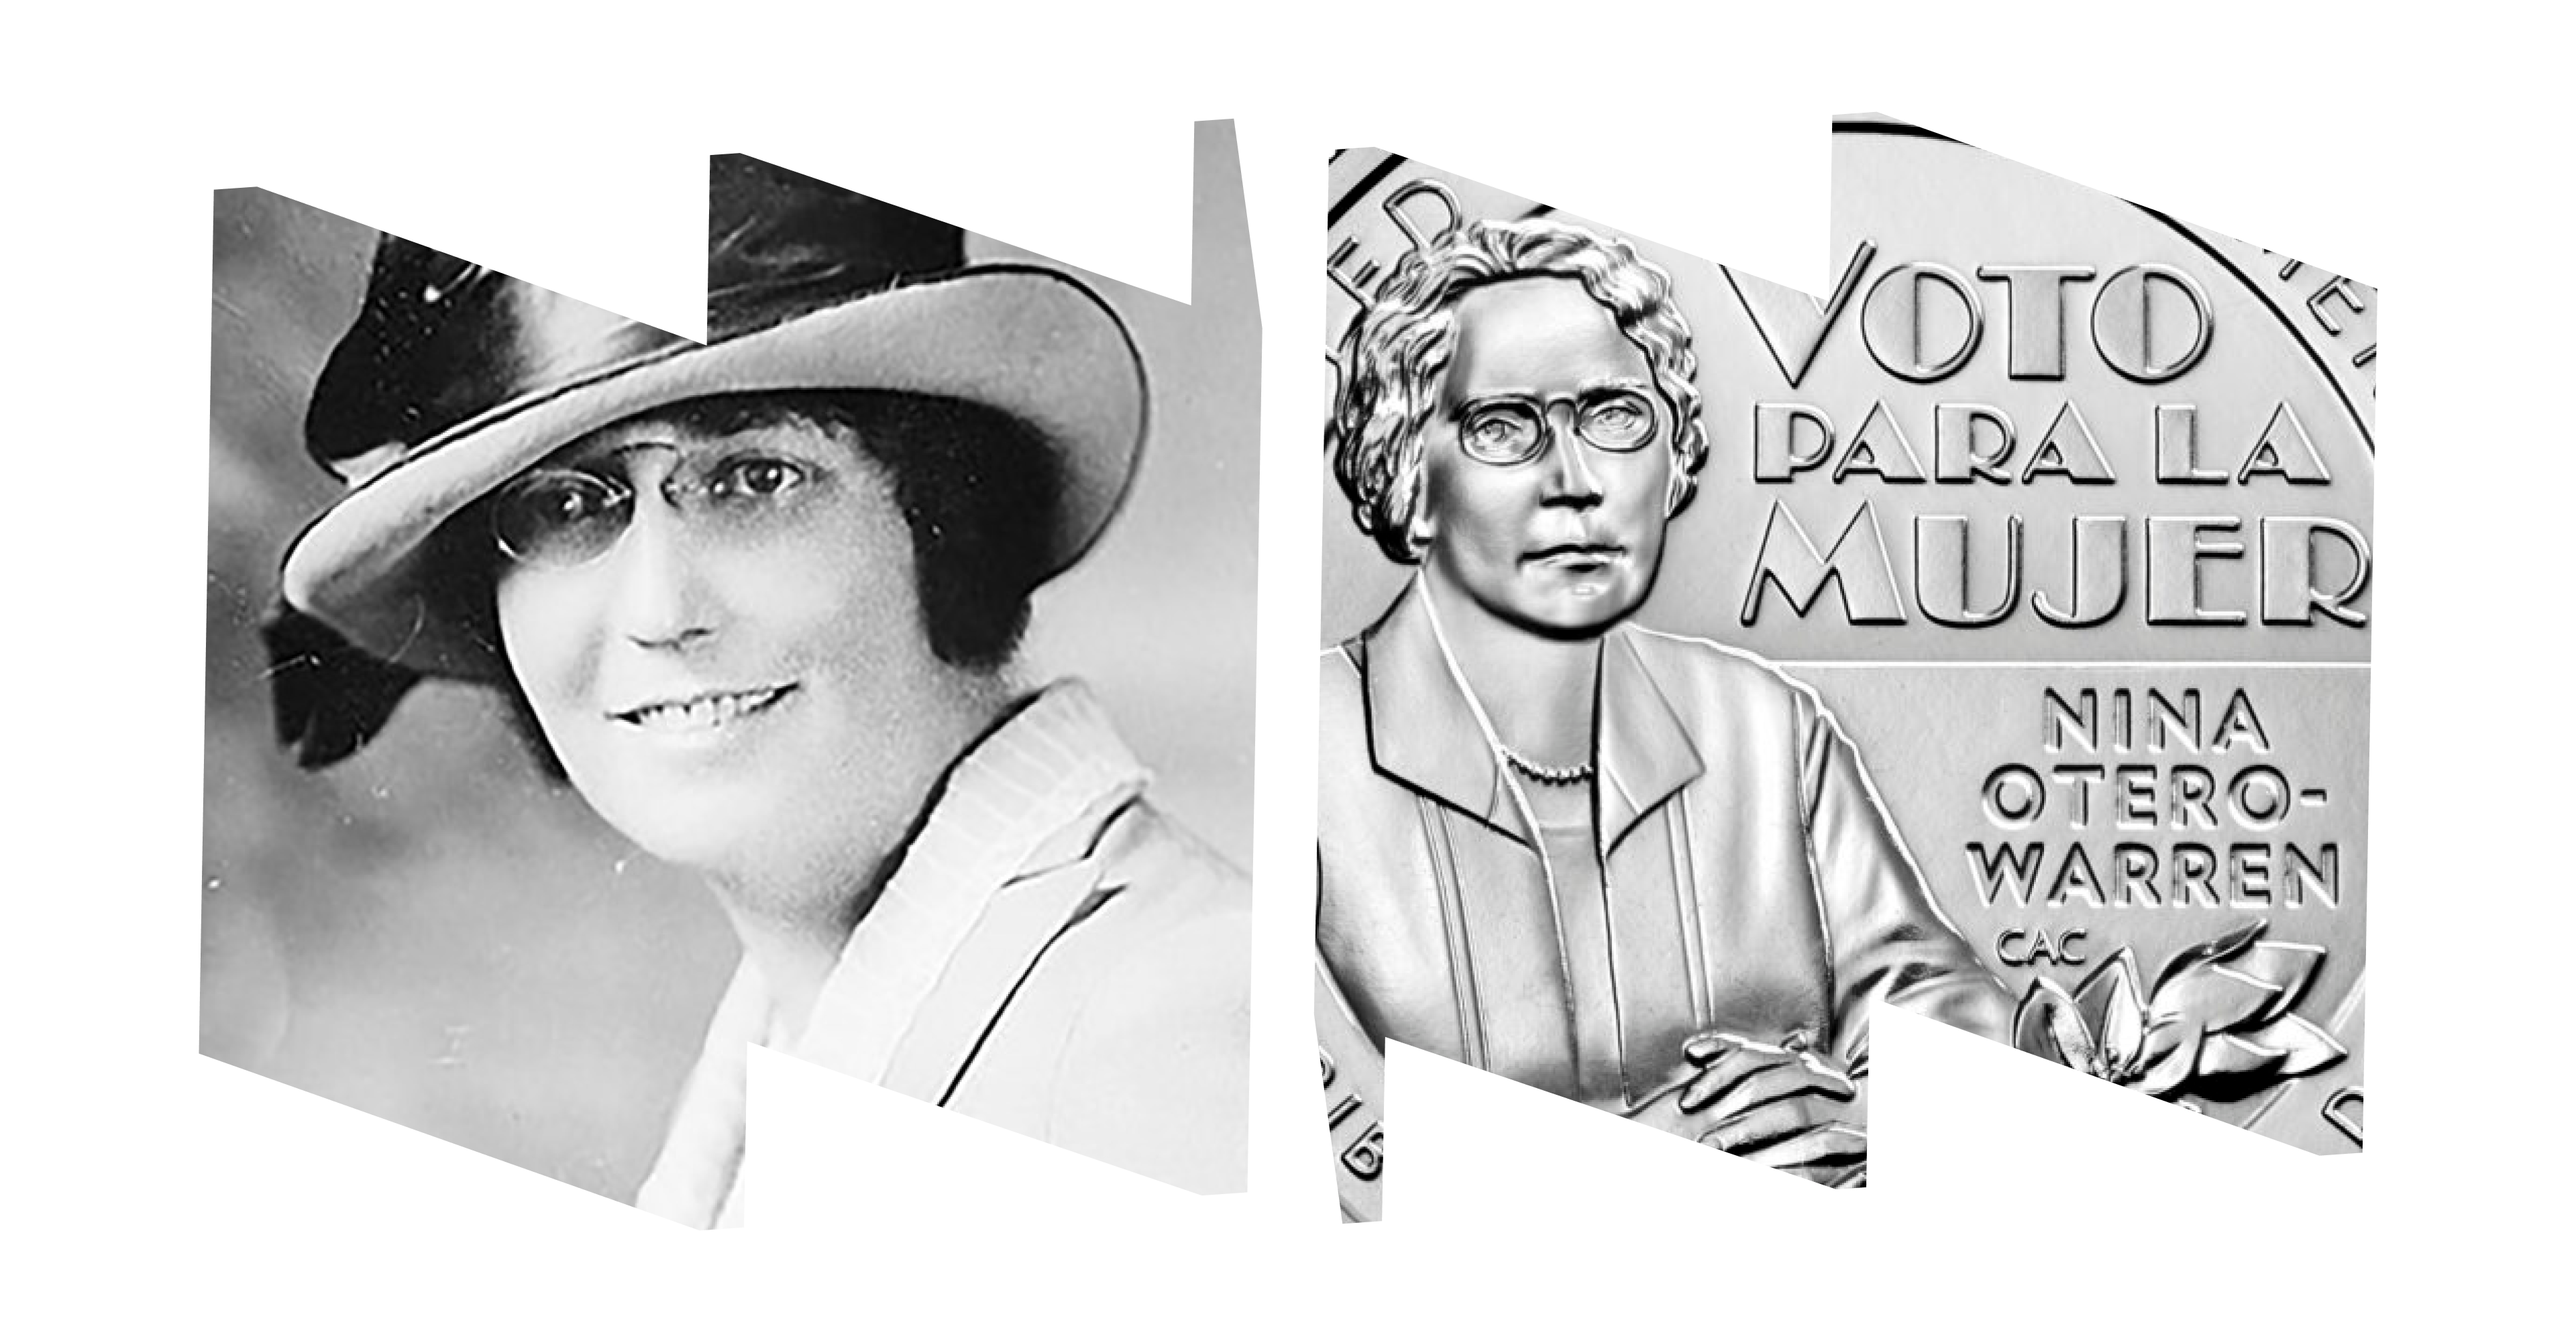 Left "W" frame shows black and white headshot of Nina Otero-Warren; right "M" frame showing image of quarter design featuring Otero-Warren seated with words "Voto Para La Mujer" and her name.